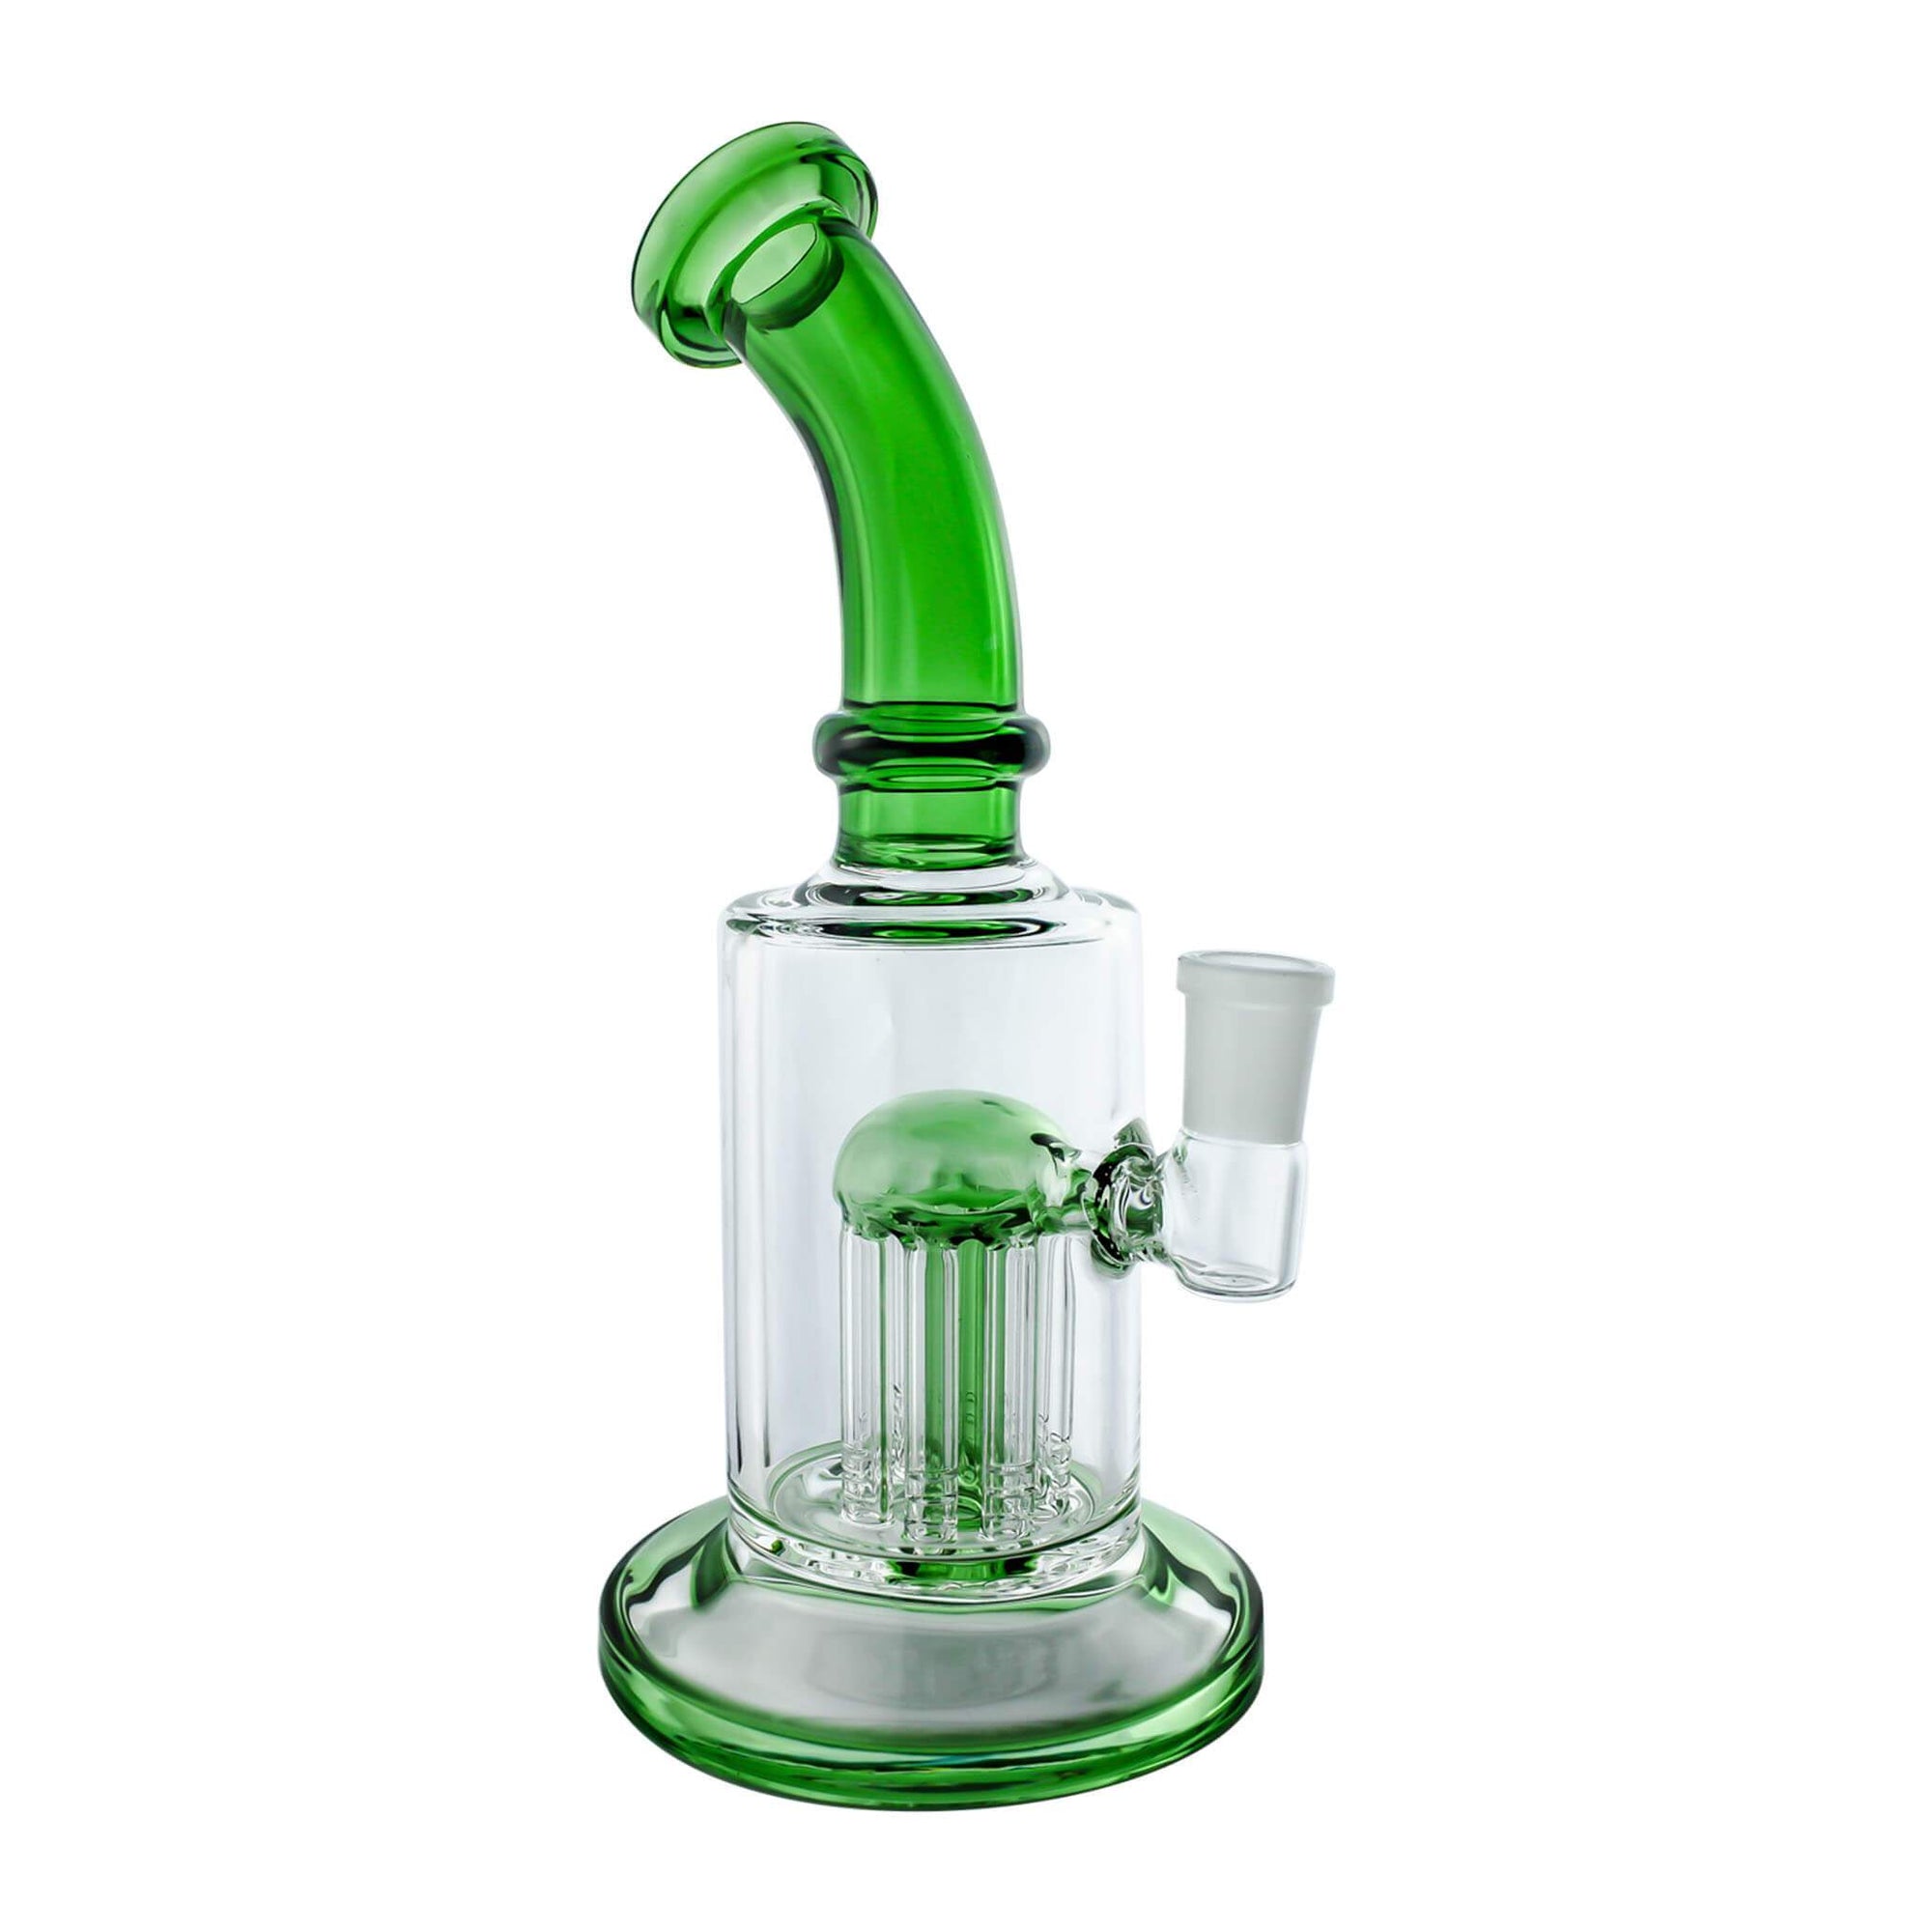 Spin Matrix Can Dab Rig with Percs | Bright Green Complete Kit View | the dabbing specialists